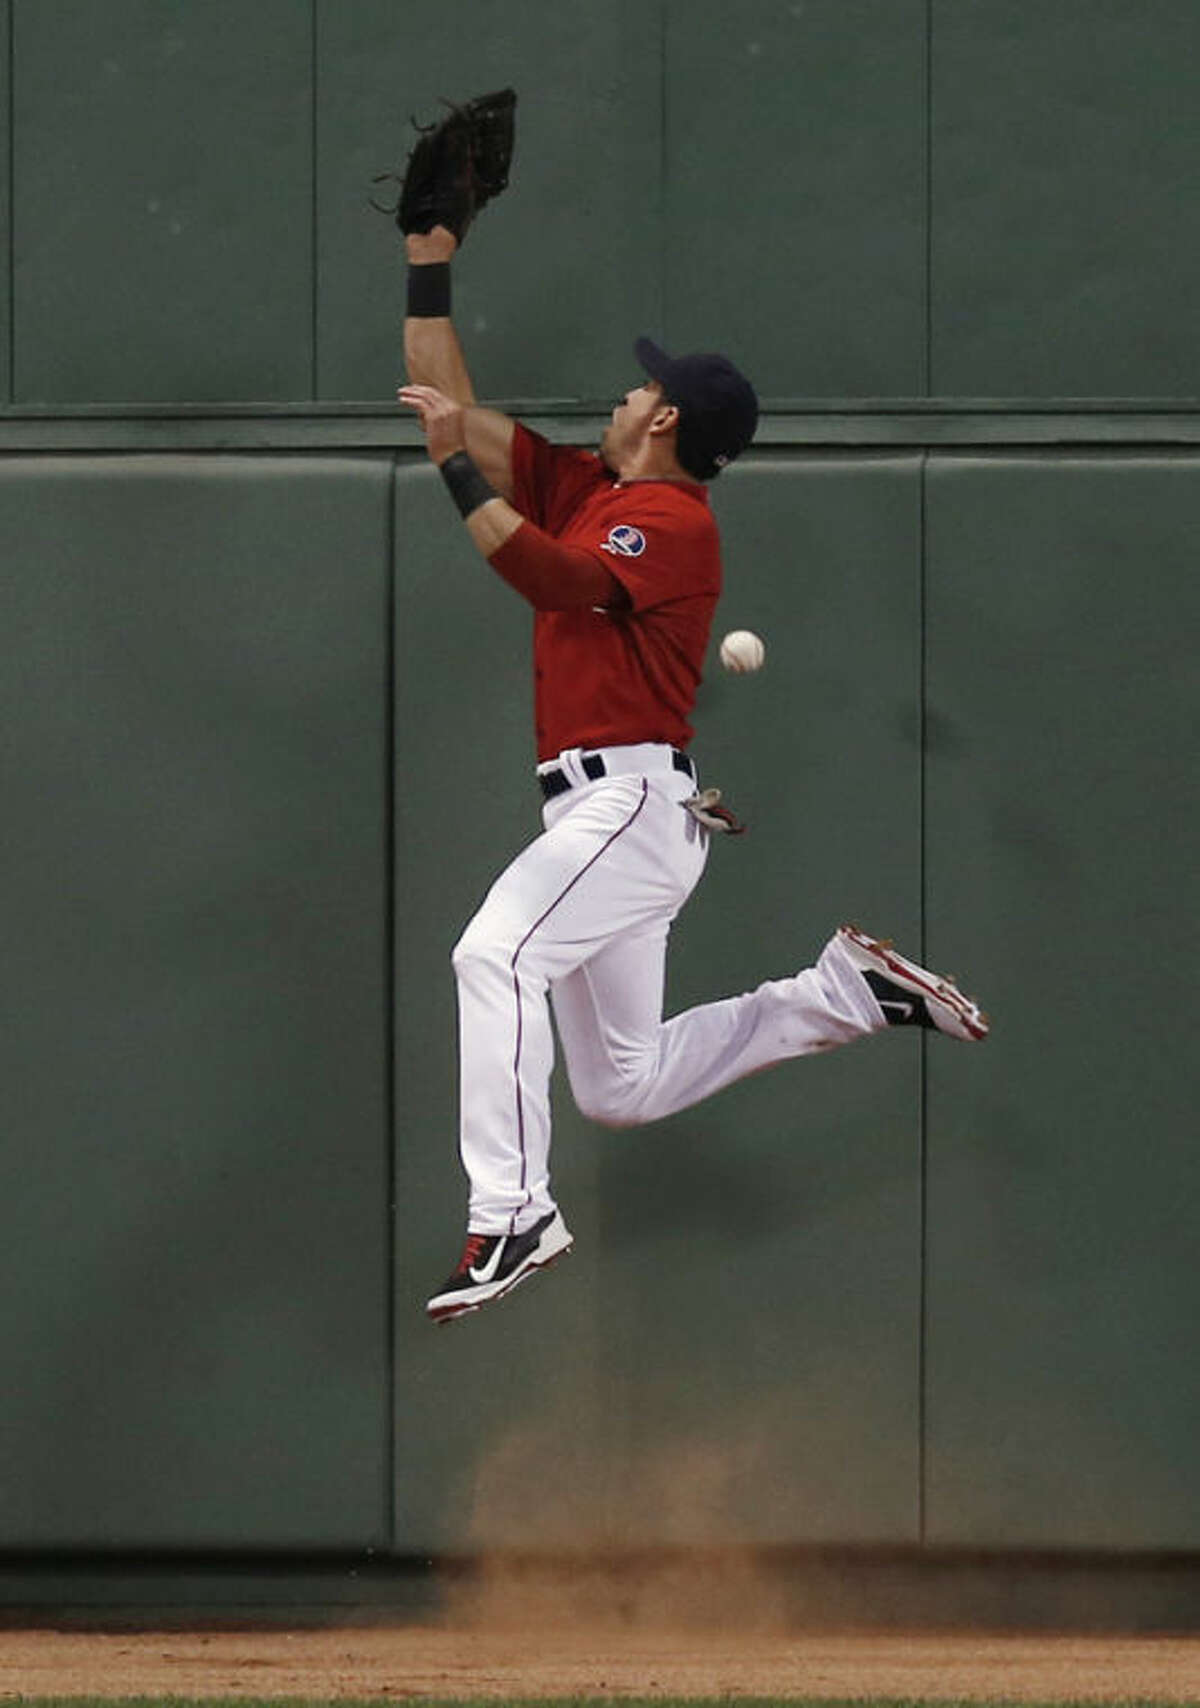 Boston Red Sox center fielder Jacoby Ellsbury can't catch a triple by New York Yankees' Eduardo Nunez during the fourth inning of a baseball game at Fenway Park in Boston Friday, Aug. 16, 2013. (AP Photo/Winslow Townson)